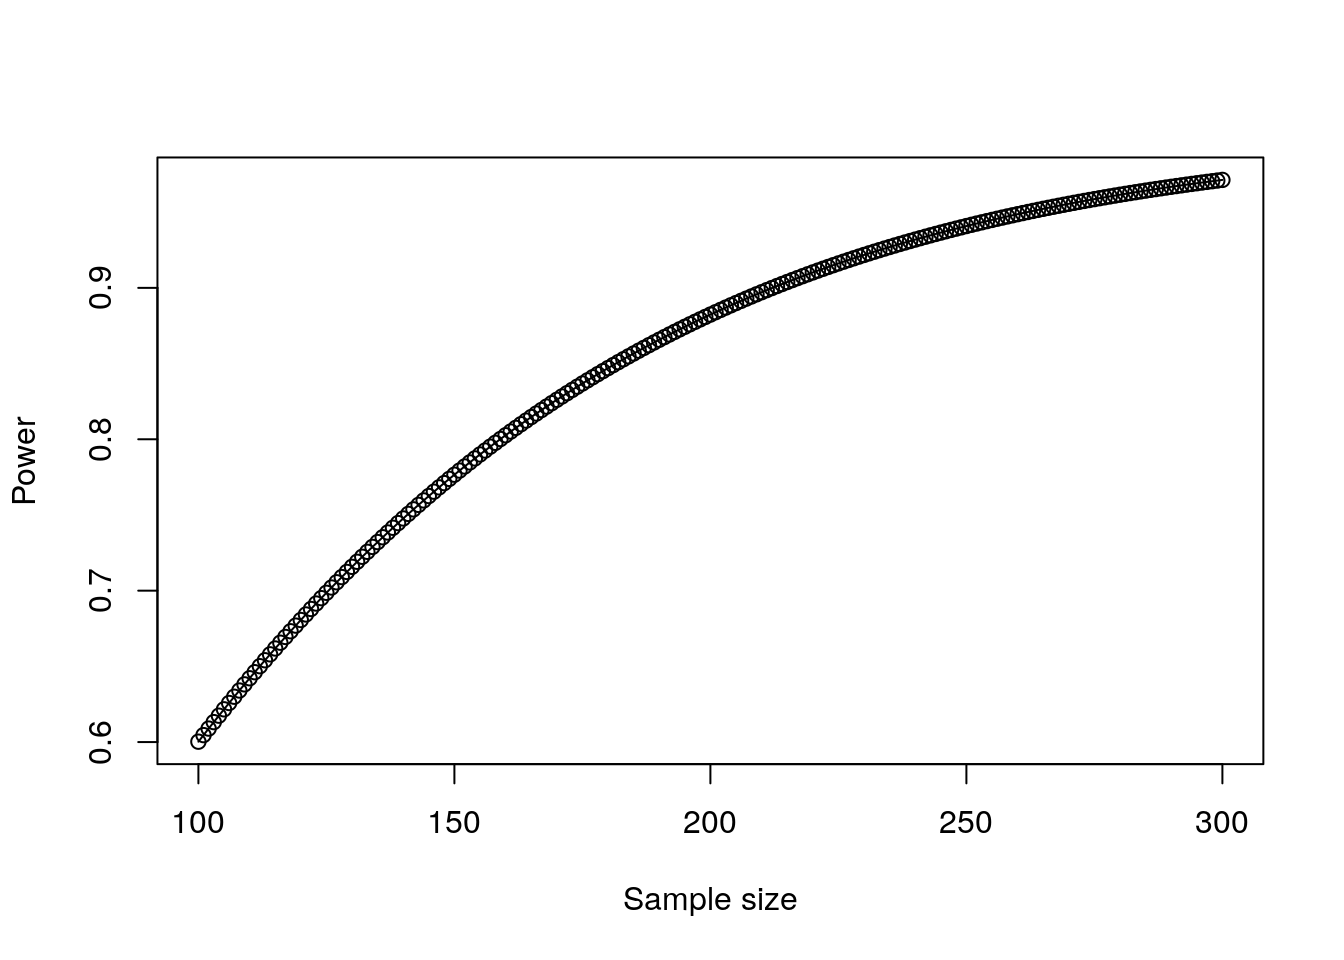 Plot of power against sample size for a small effect of a second input variable in a linear regression model